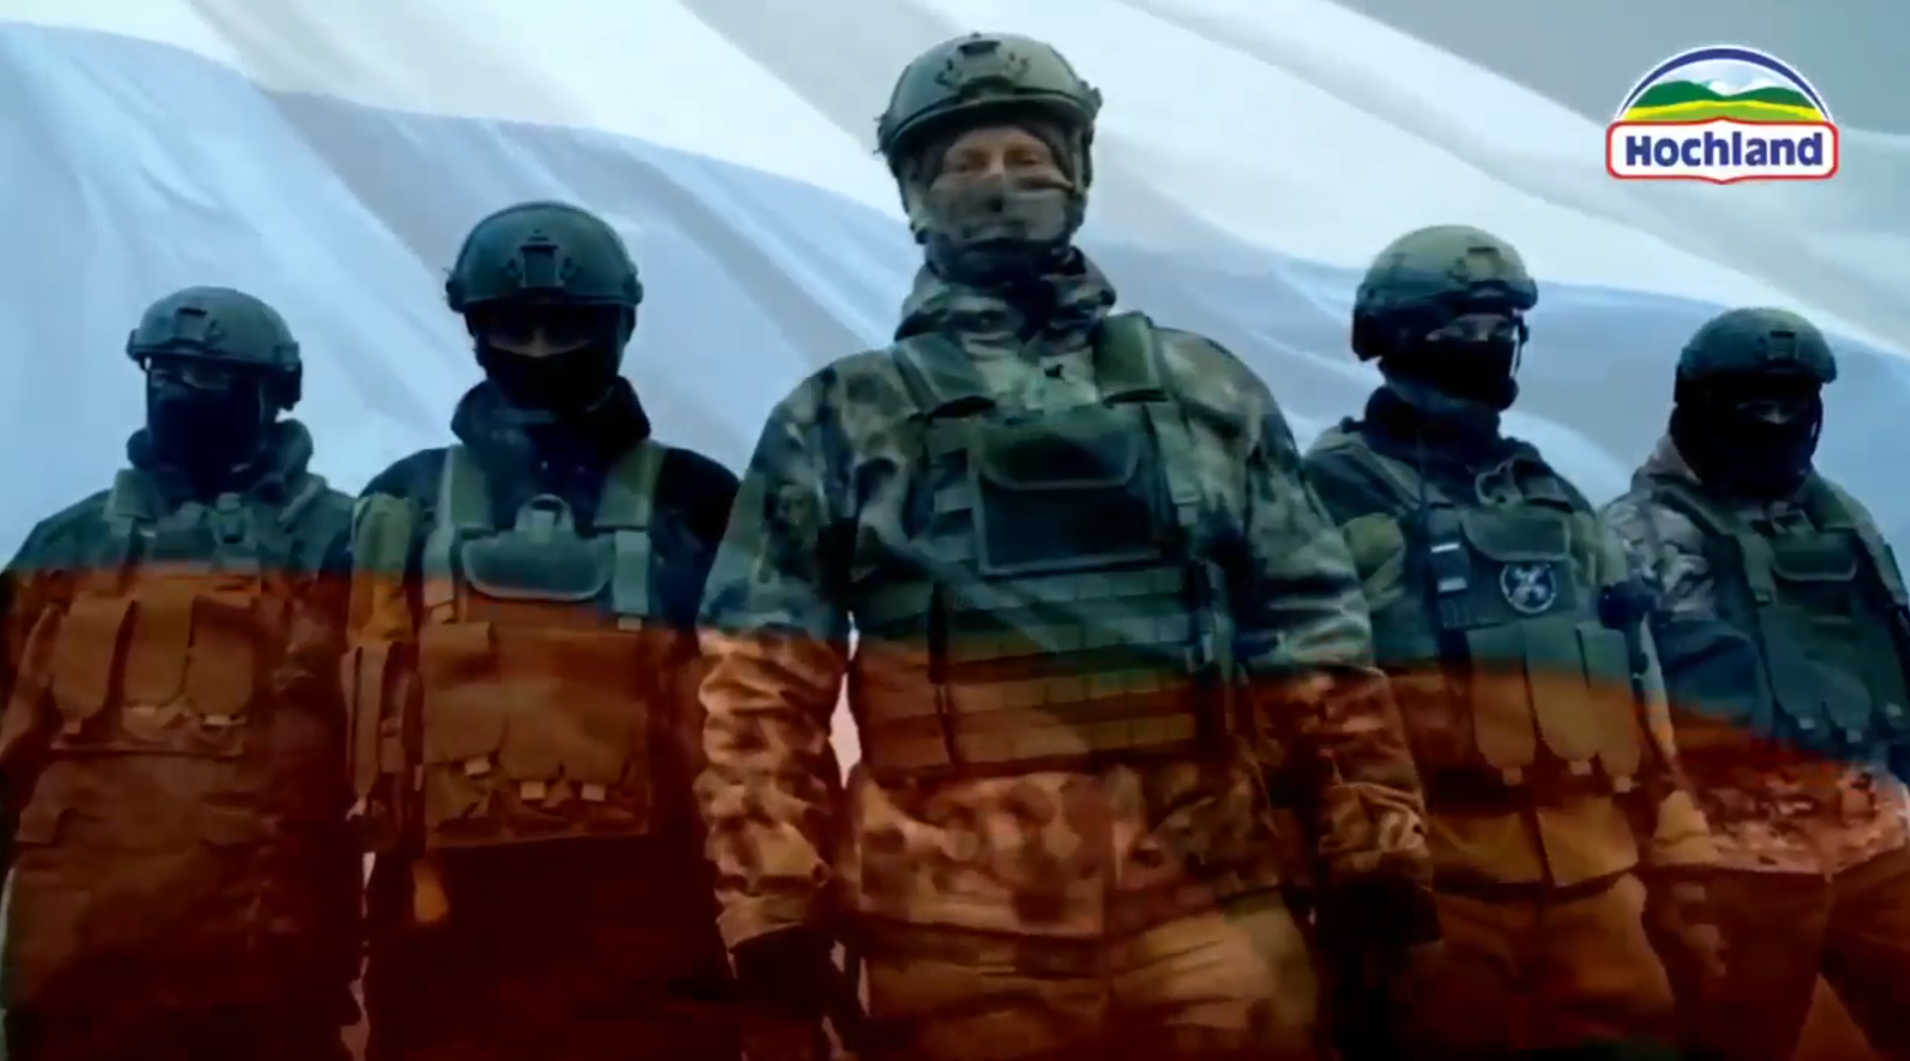 An image from a fake video sent to me claiming German cheese company Hochland is sending support to Russian soldiers.